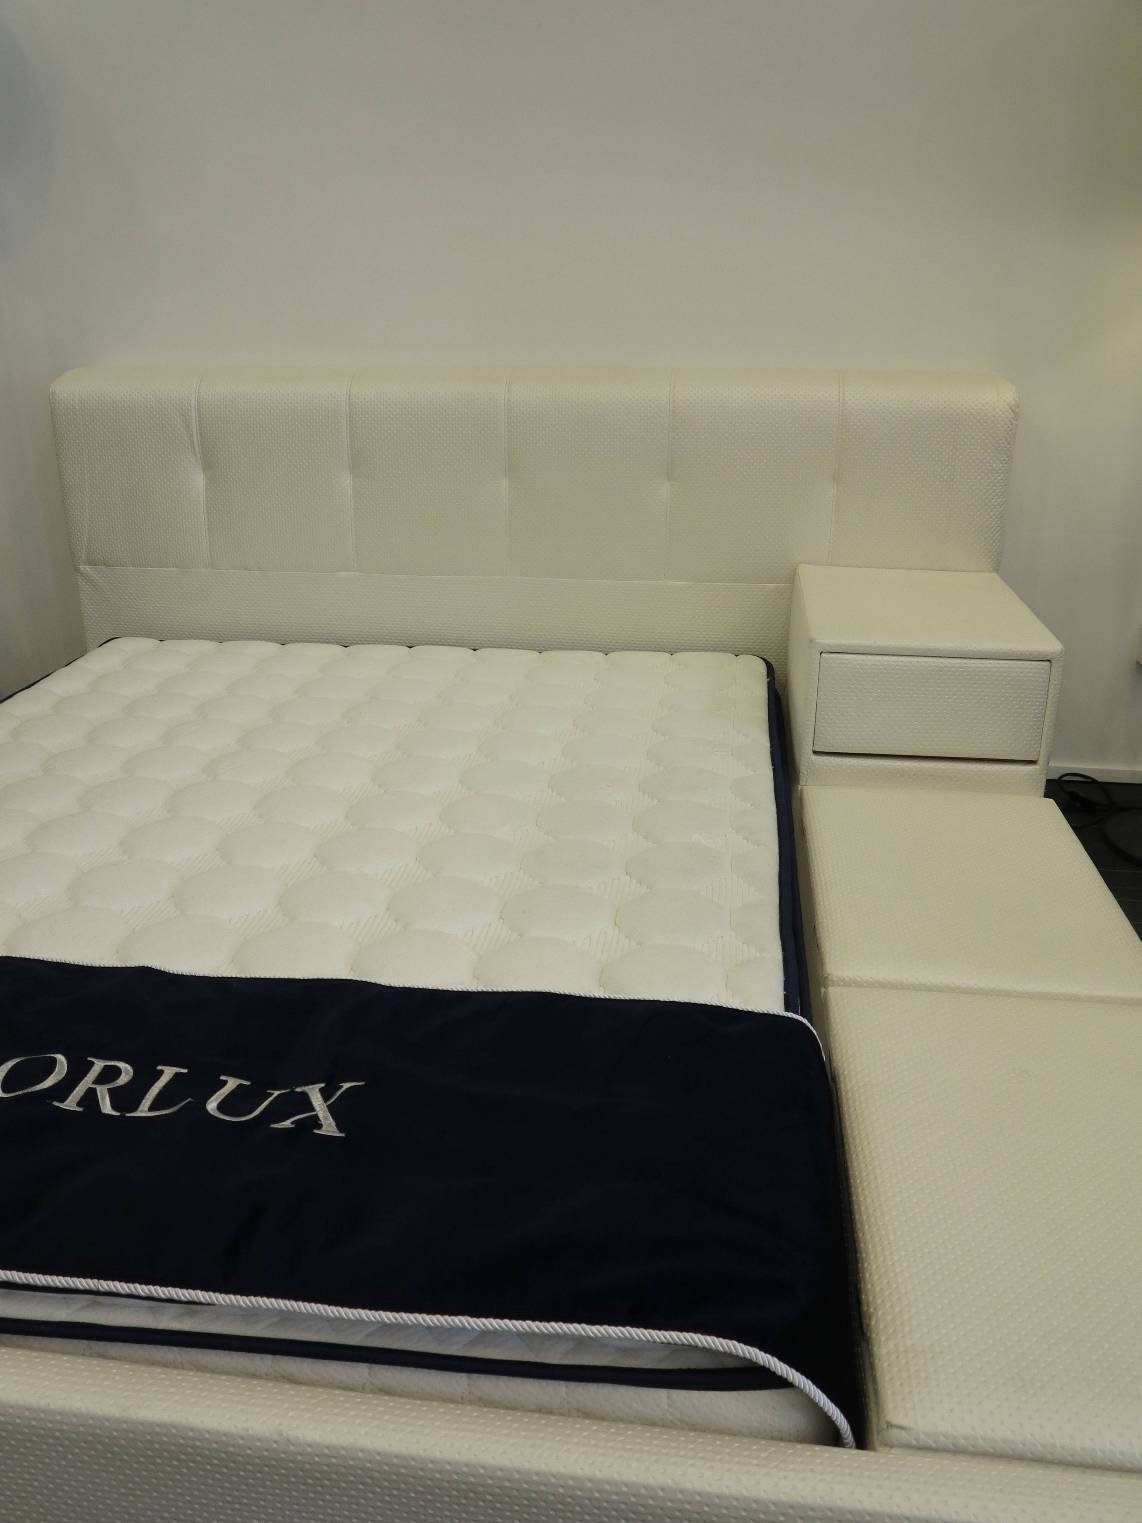 Dorlux mattress with customised compartments for storage.